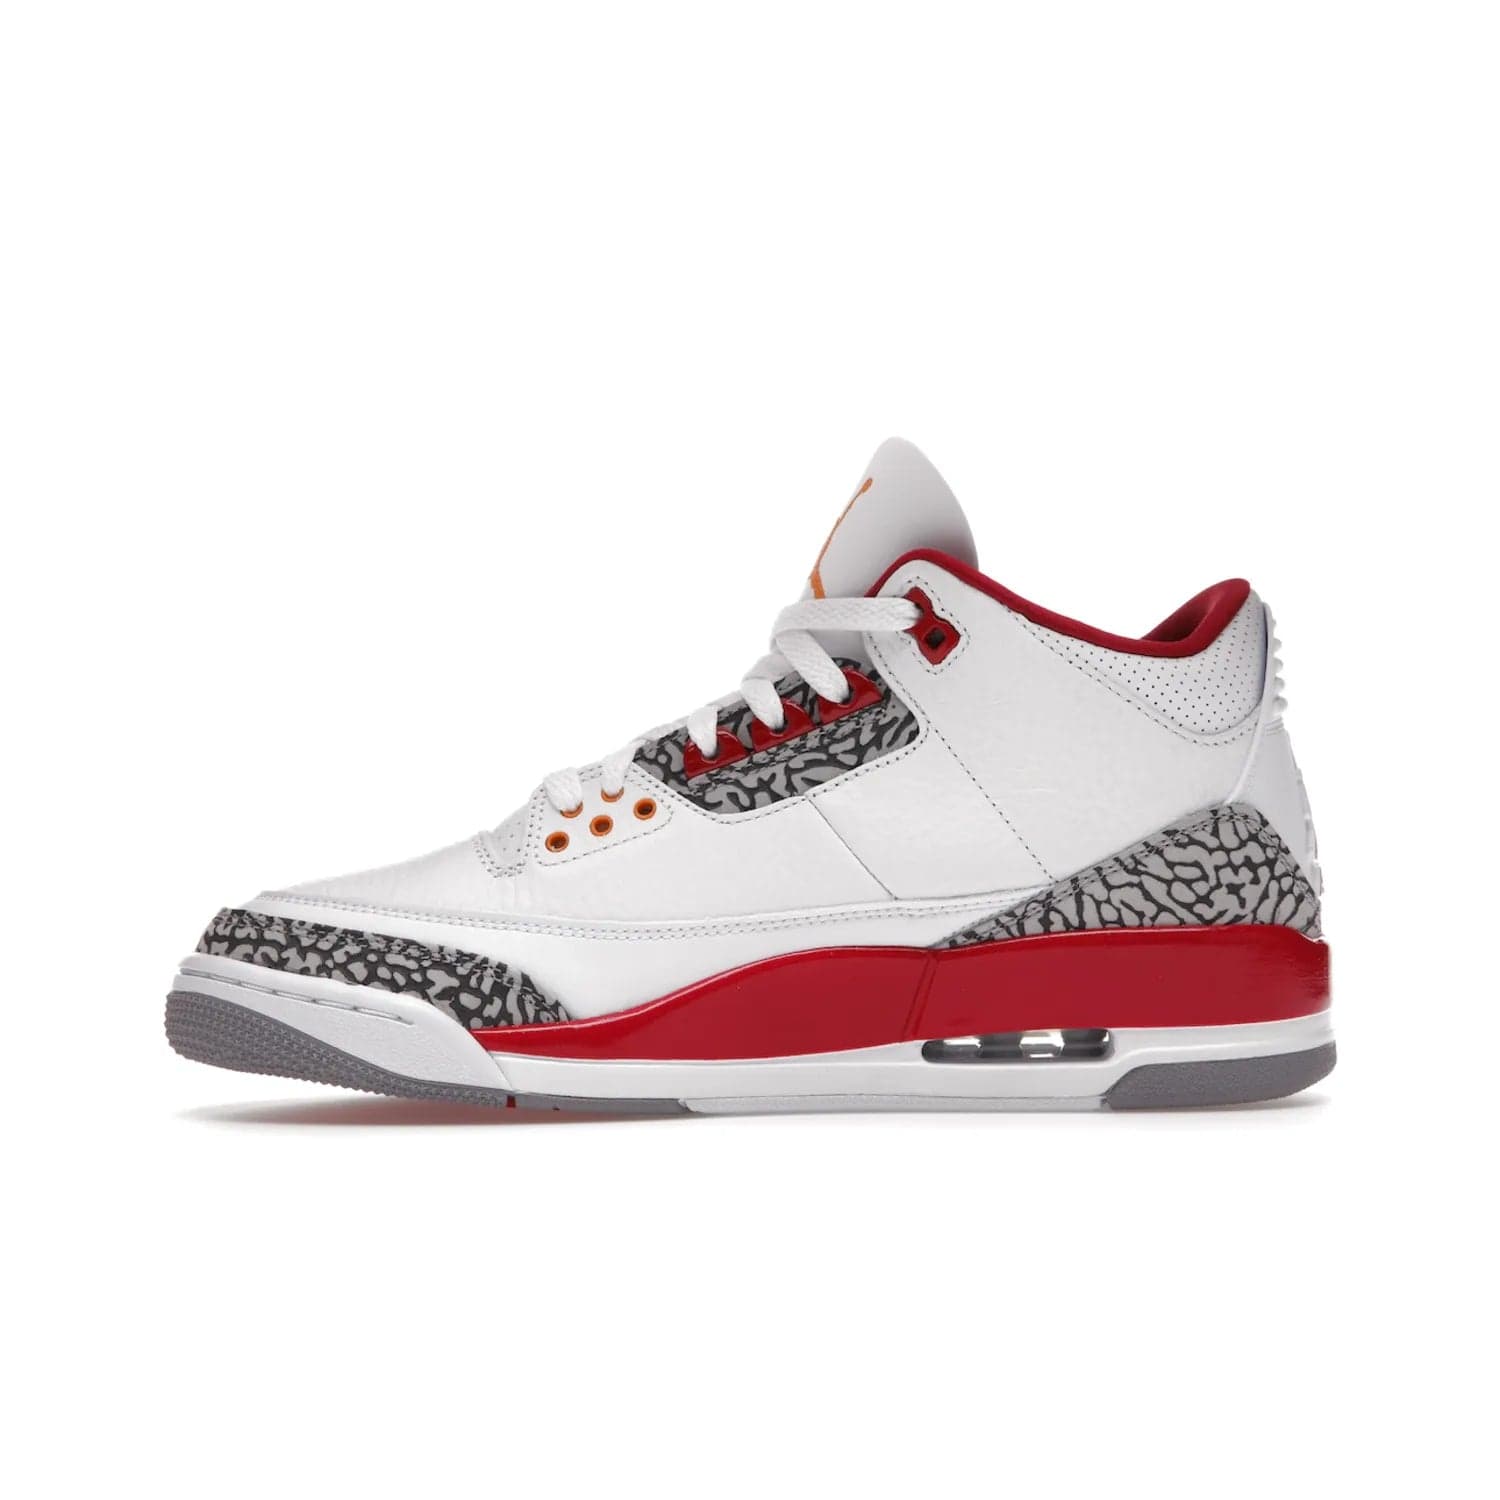 Jordan 3 Retro Cardinal Red - Image 19 - Only at www.BallersClubKickz.com - Air Jordan 3 Retro Cardinal Red combines classic style and modern appeal - white tumbled leather, signature Elephant Print overlays, cardinal red midsoles, Jumpman logo embroidery. Available Feb 2022.